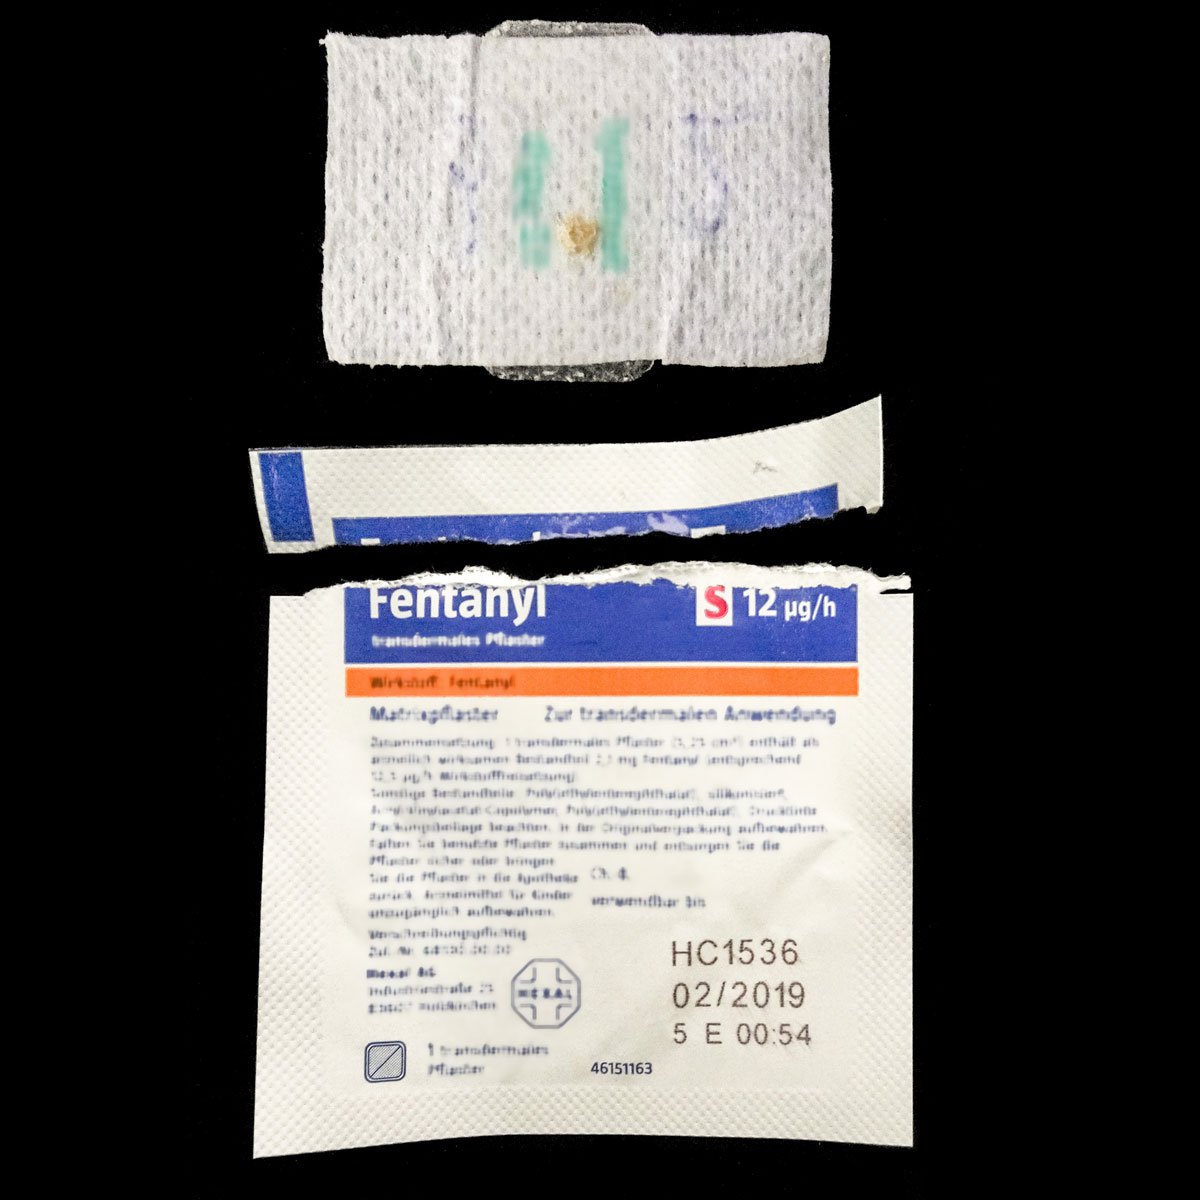 non gel fentanyl patches extraction